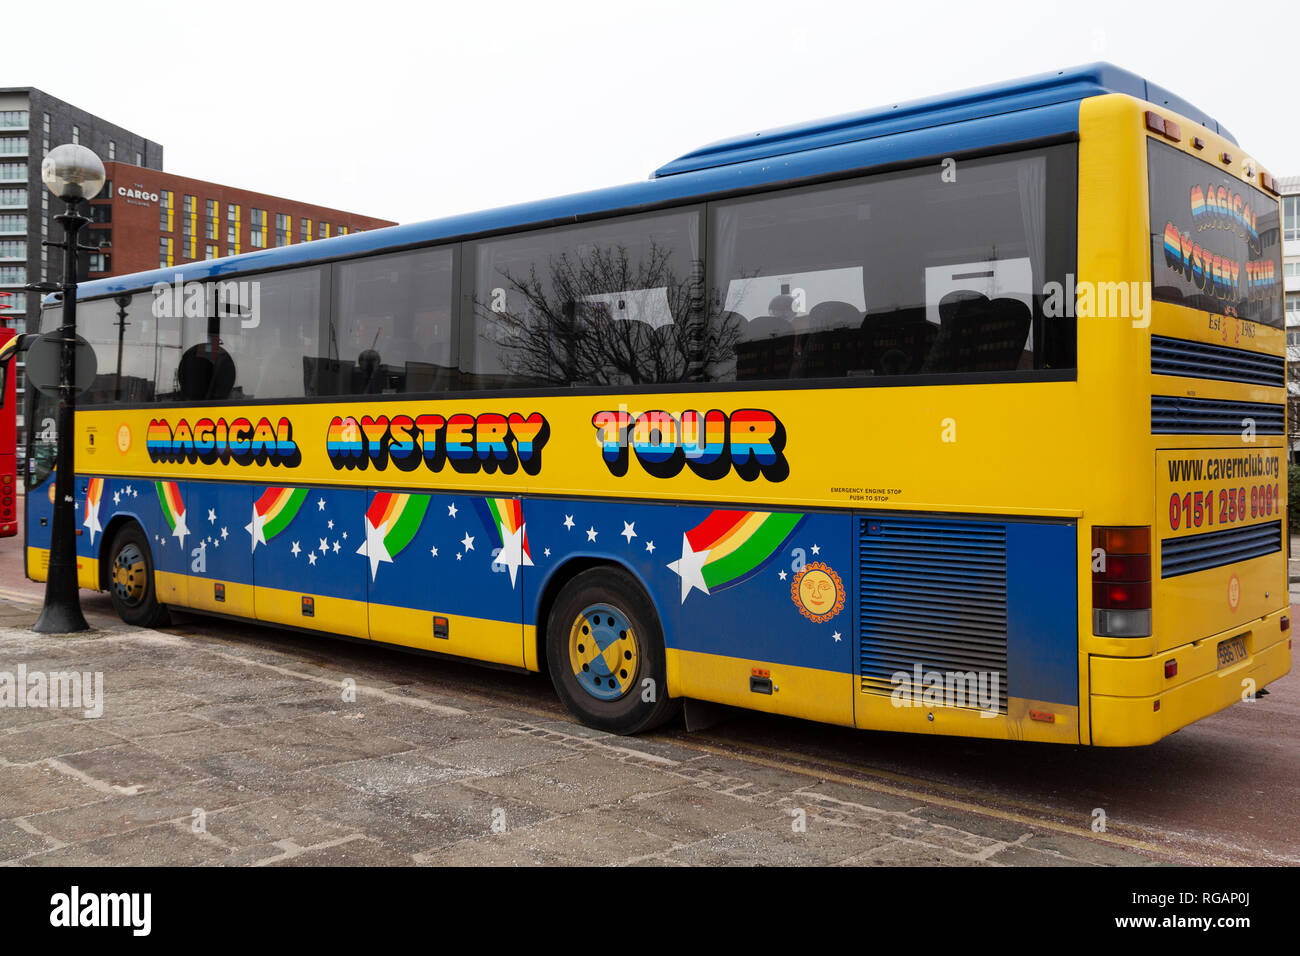 The Magical Mystery Tour bus in Liverpool, England. The bus tour takes participants to locations associated with The Beatles in Liverpool. Stock Photo